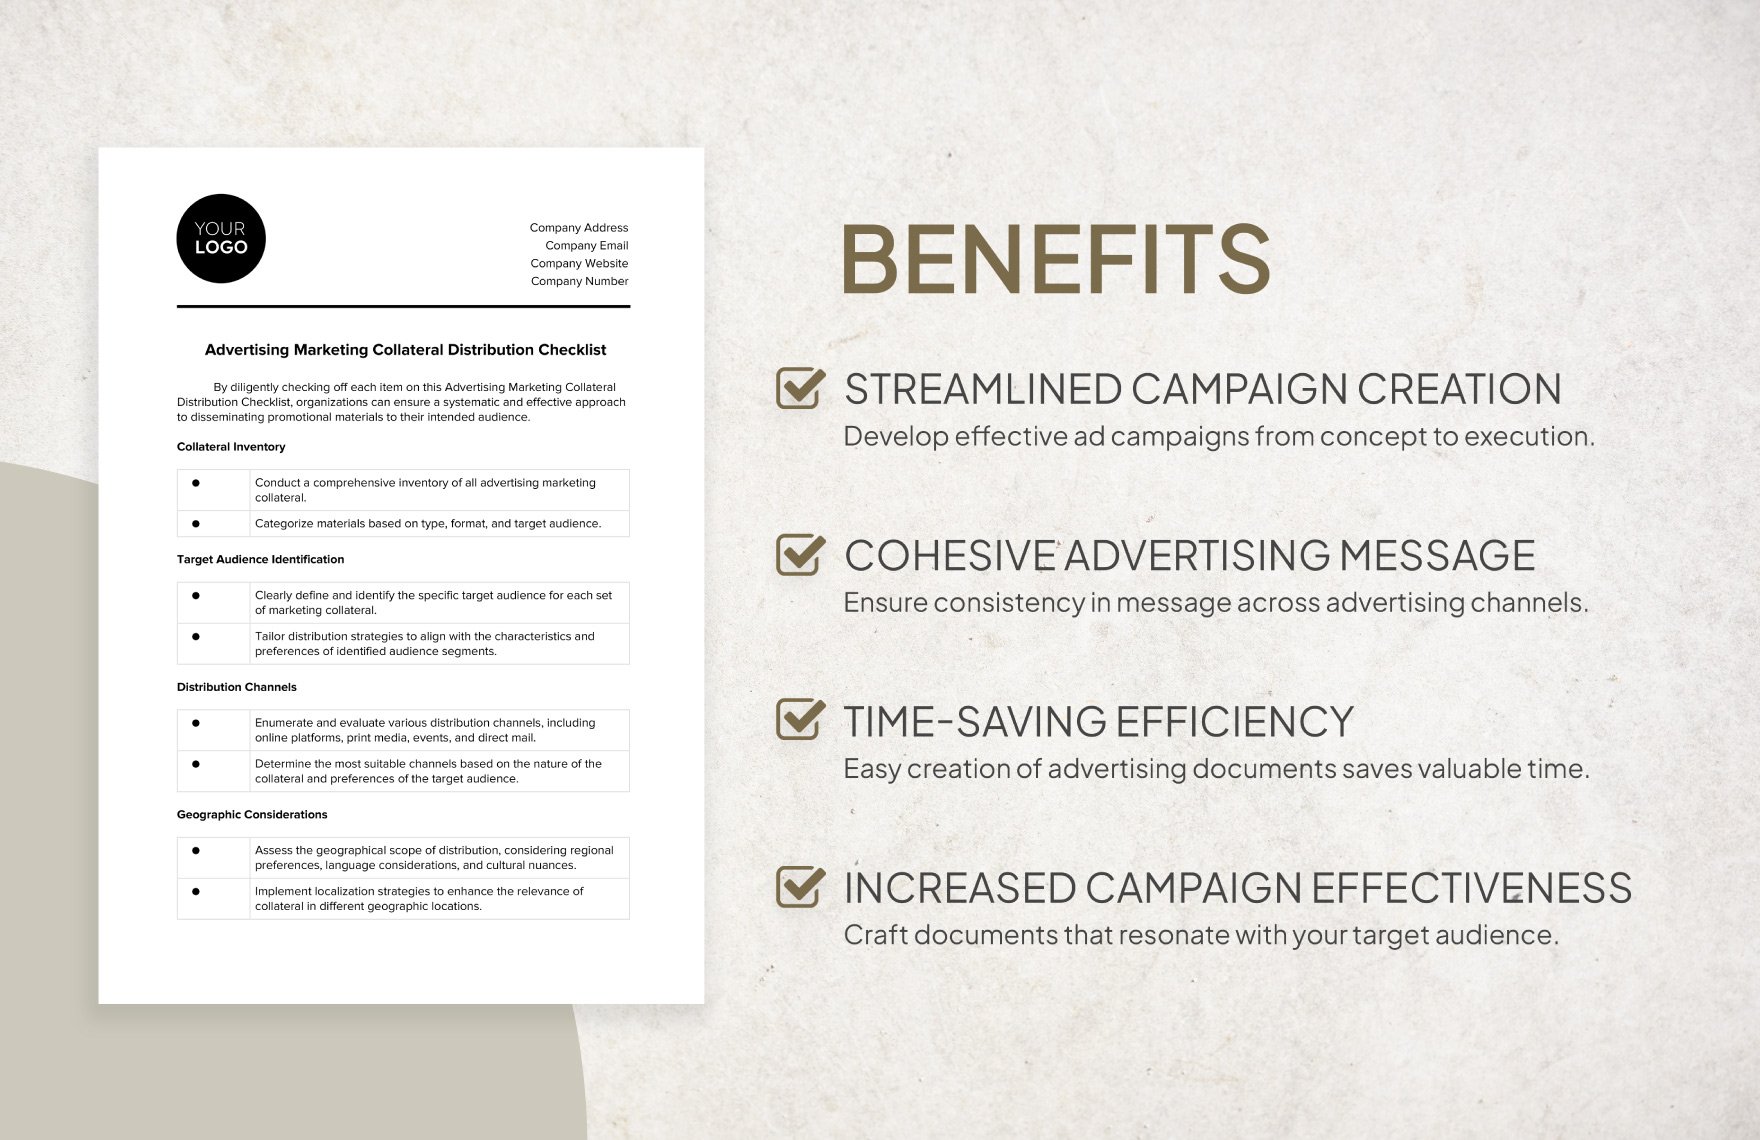 Advertising Marketing Collateral Distribution Checklist Template